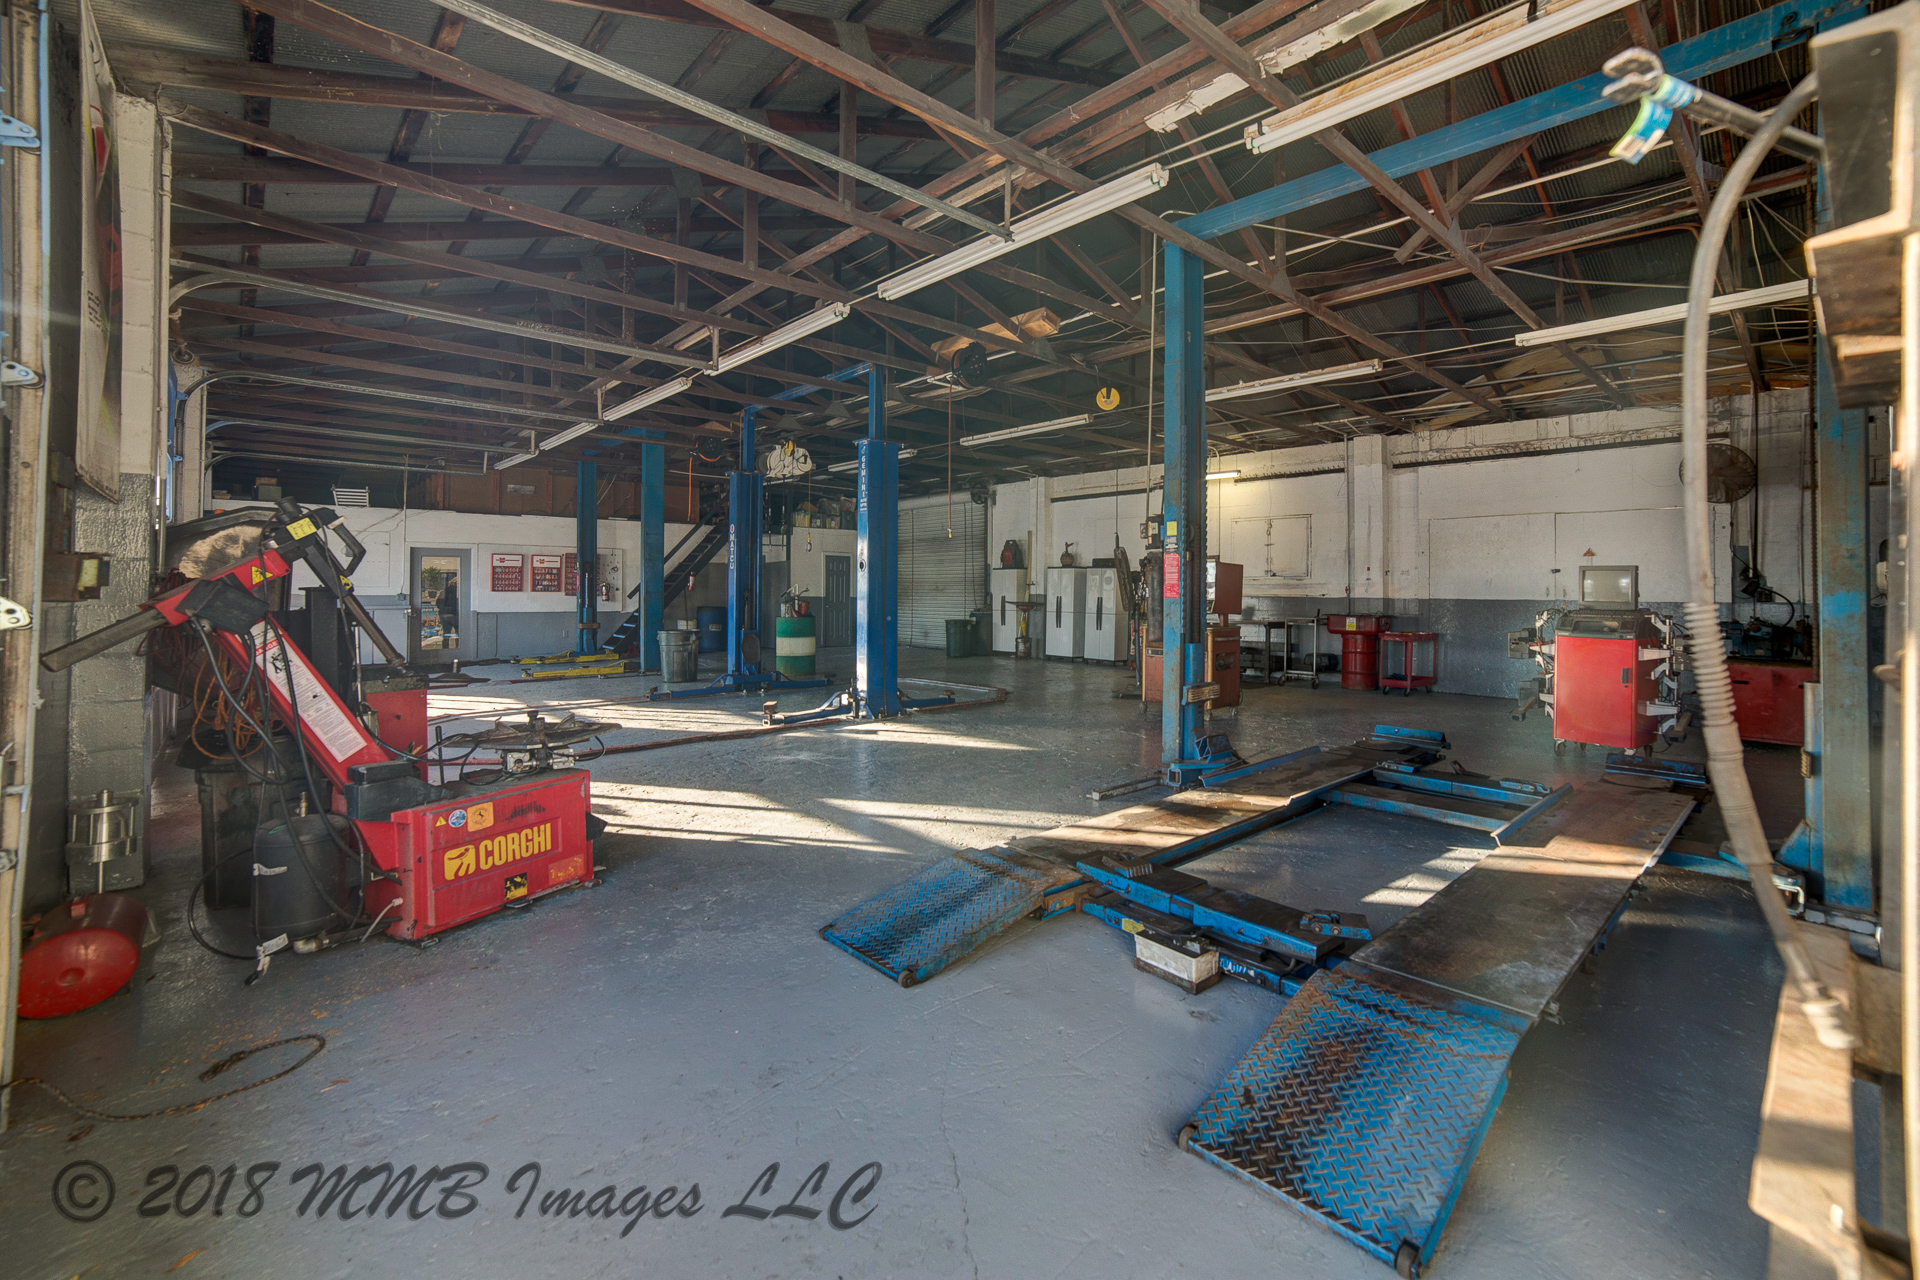 Listing Photo for Car Repair Shop Business Opportunity and Real Estate for Sale in Crystal River, Citrus County